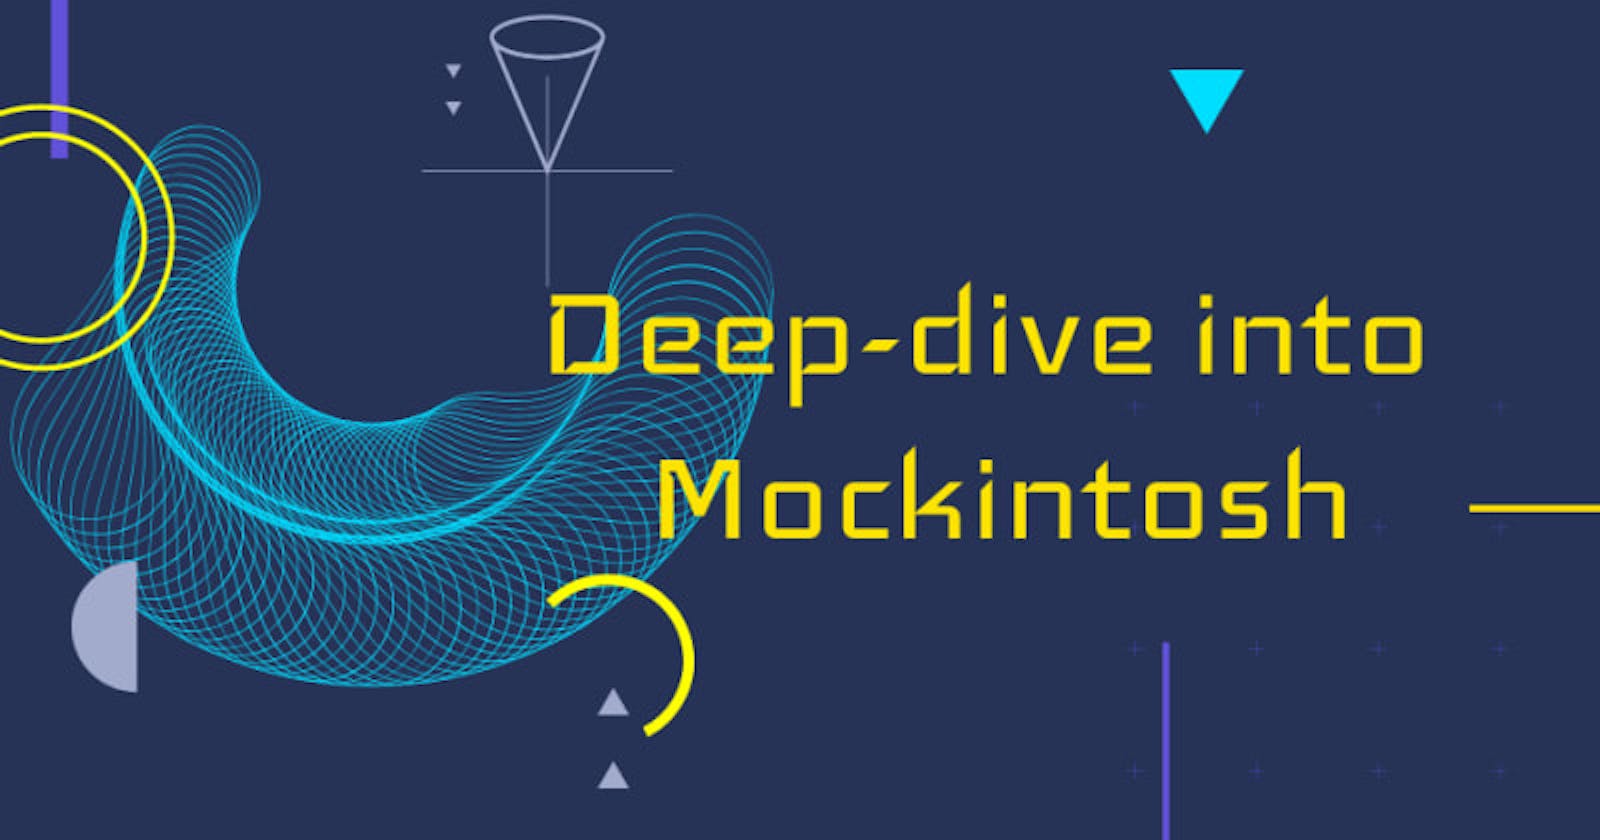 Deep-dive into Mockintosh - an Open Source Microservice Mocking